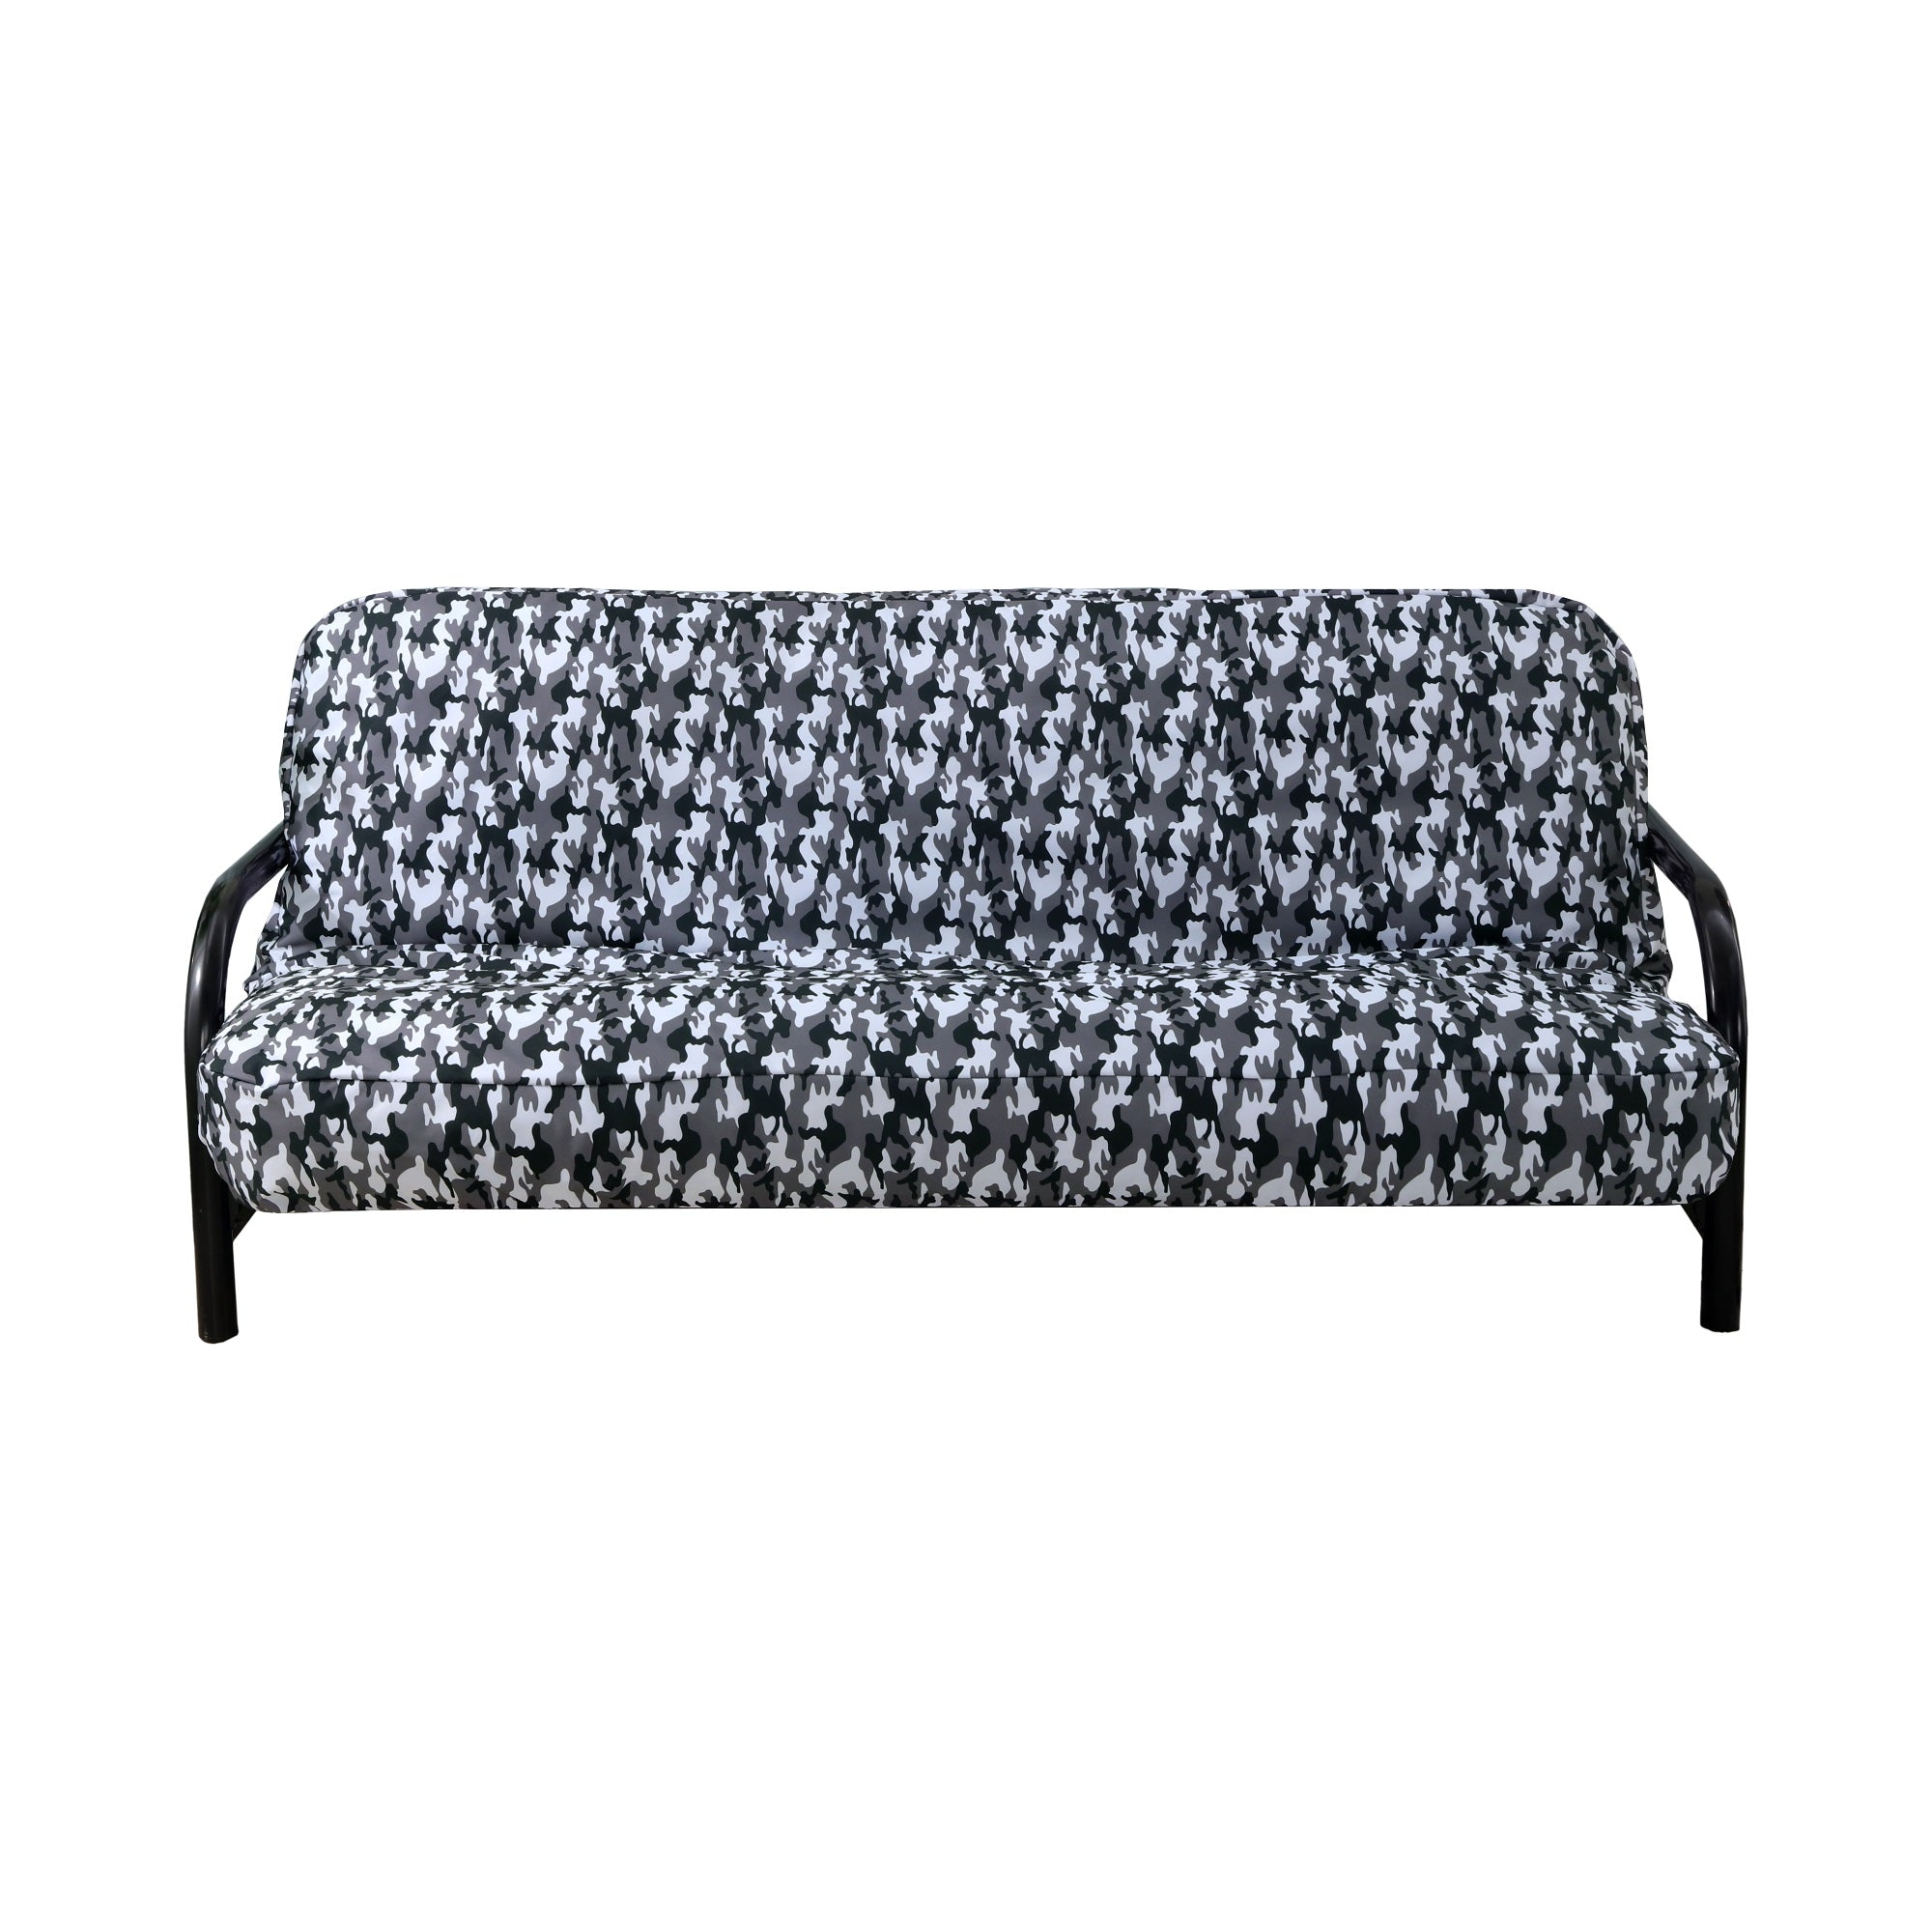 OctoRose Chenille Grey Design Futon Cover Twin or Full Size (Cover Onl